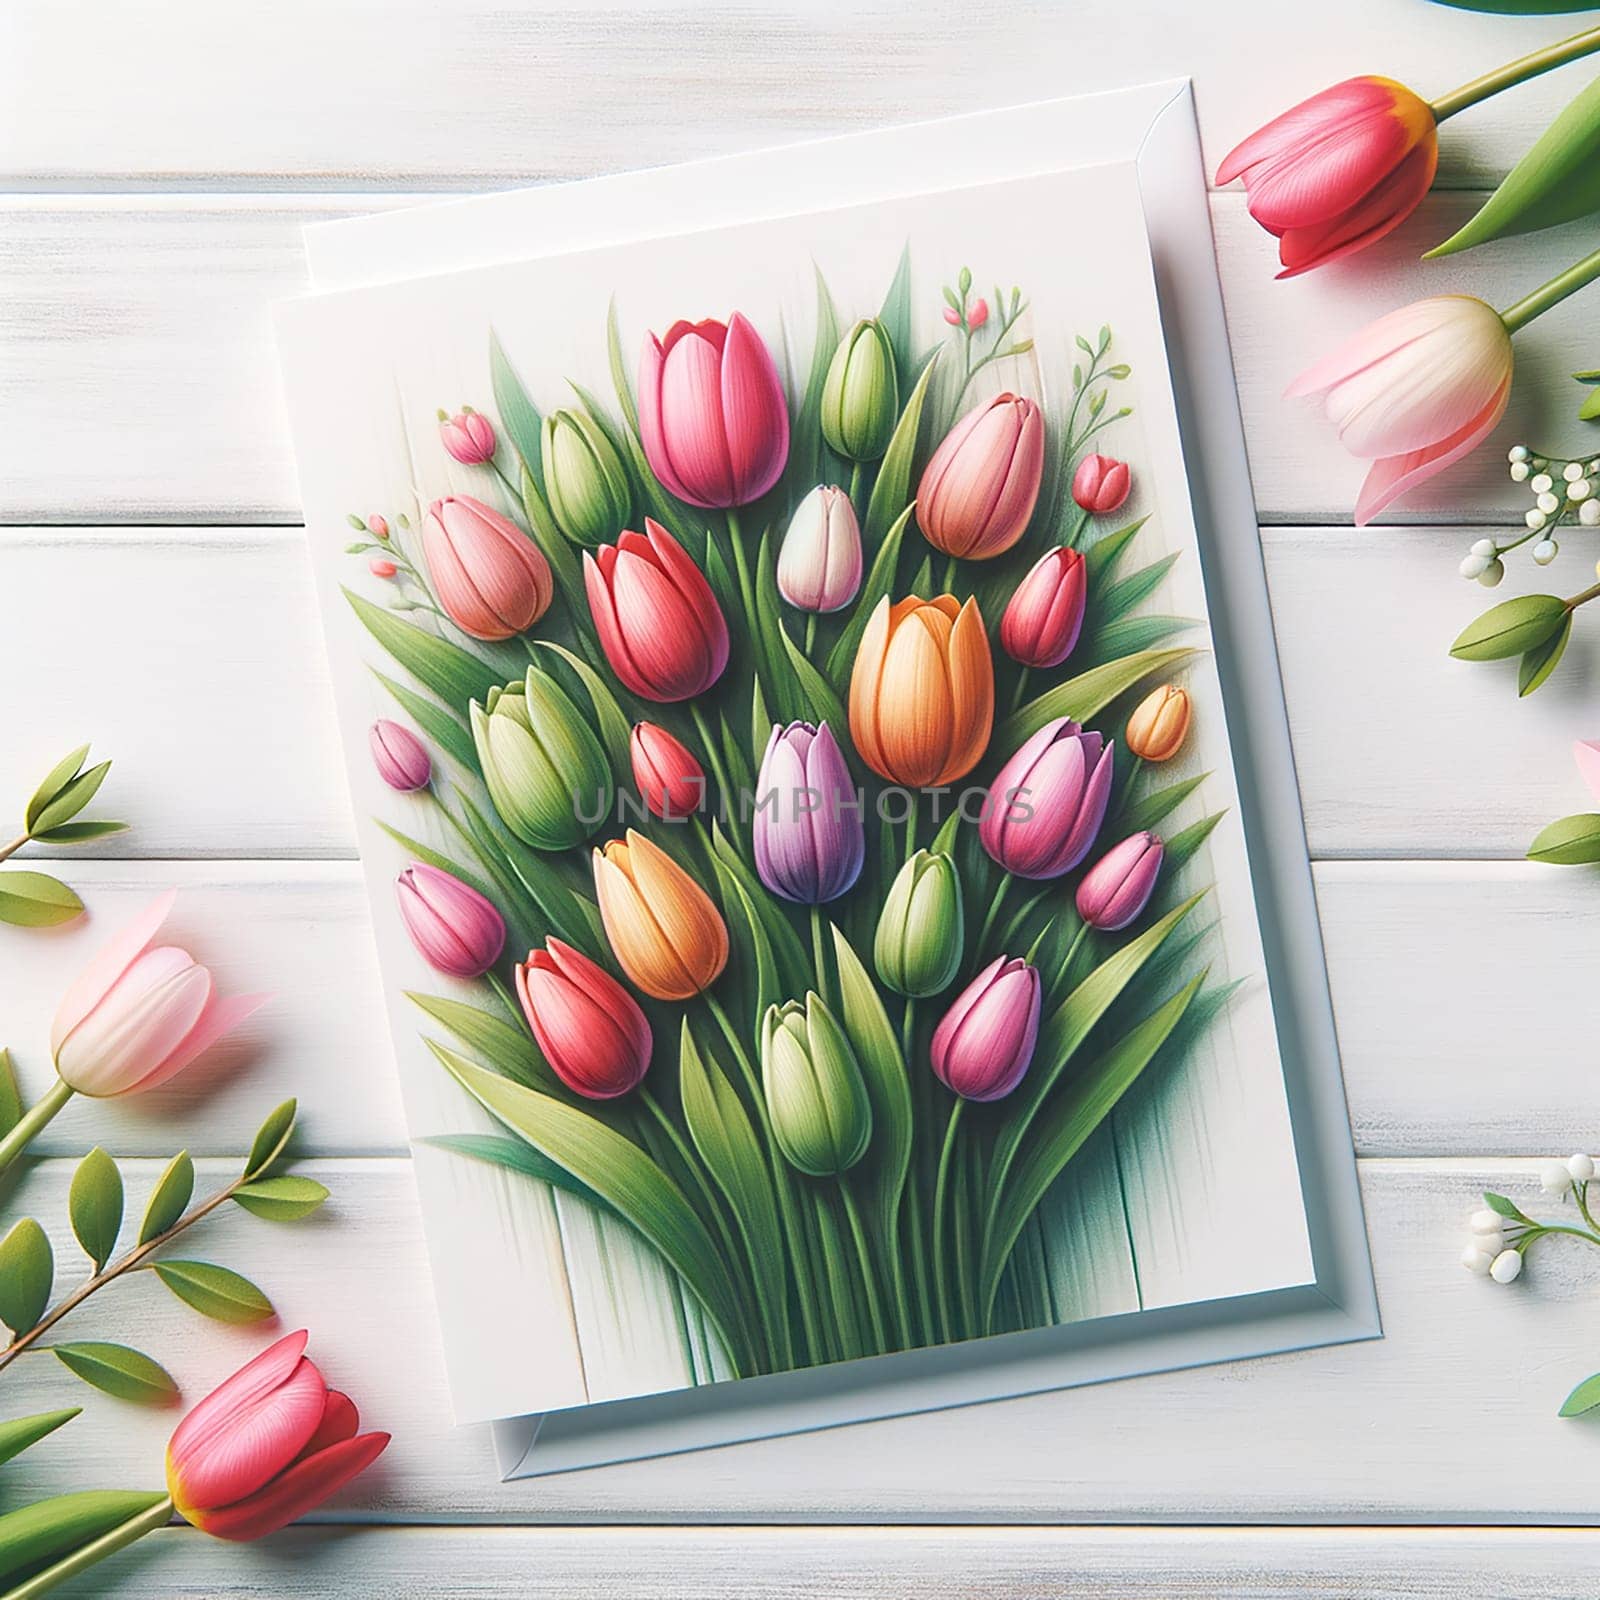 Mother's Day Delight: Floral Greeting Card Mockup by Petrichor